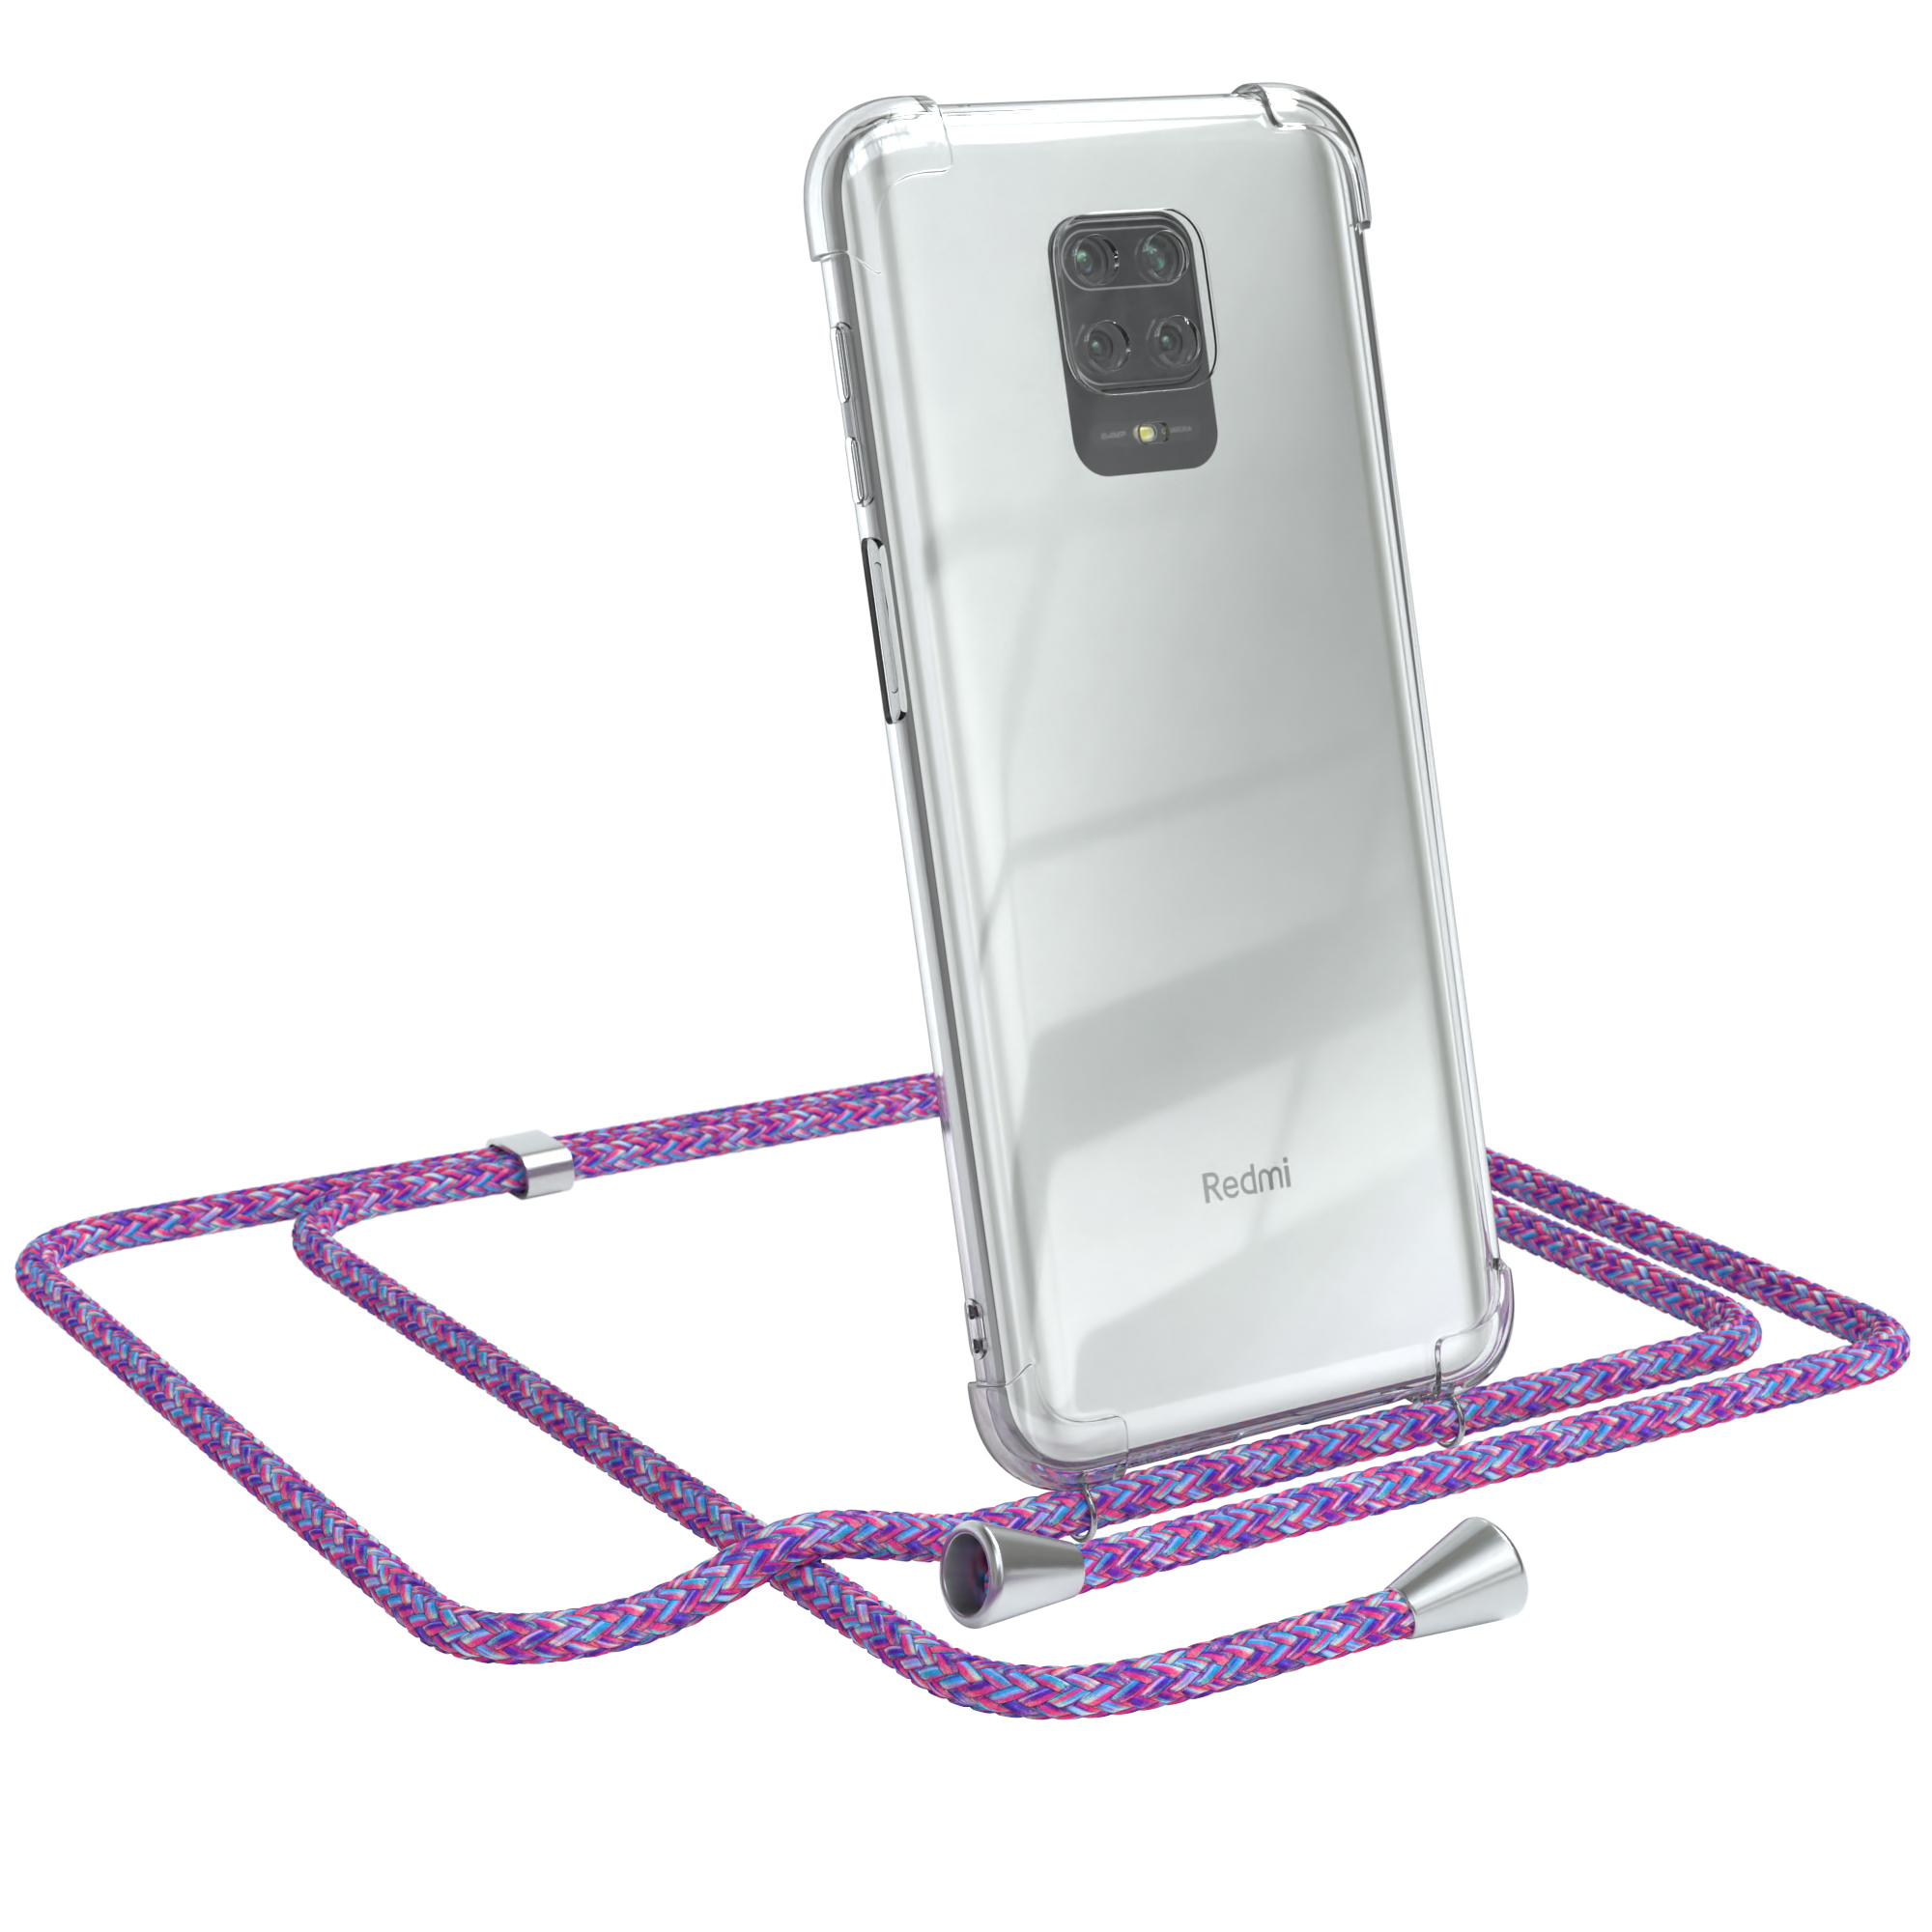 EAZY CASE Clear Cover Silber Pro Redmi 9S 9 / Max, / Pro Umhängeband, 9 Xiaomi, mit Lila Note Clips / Umhängetasche